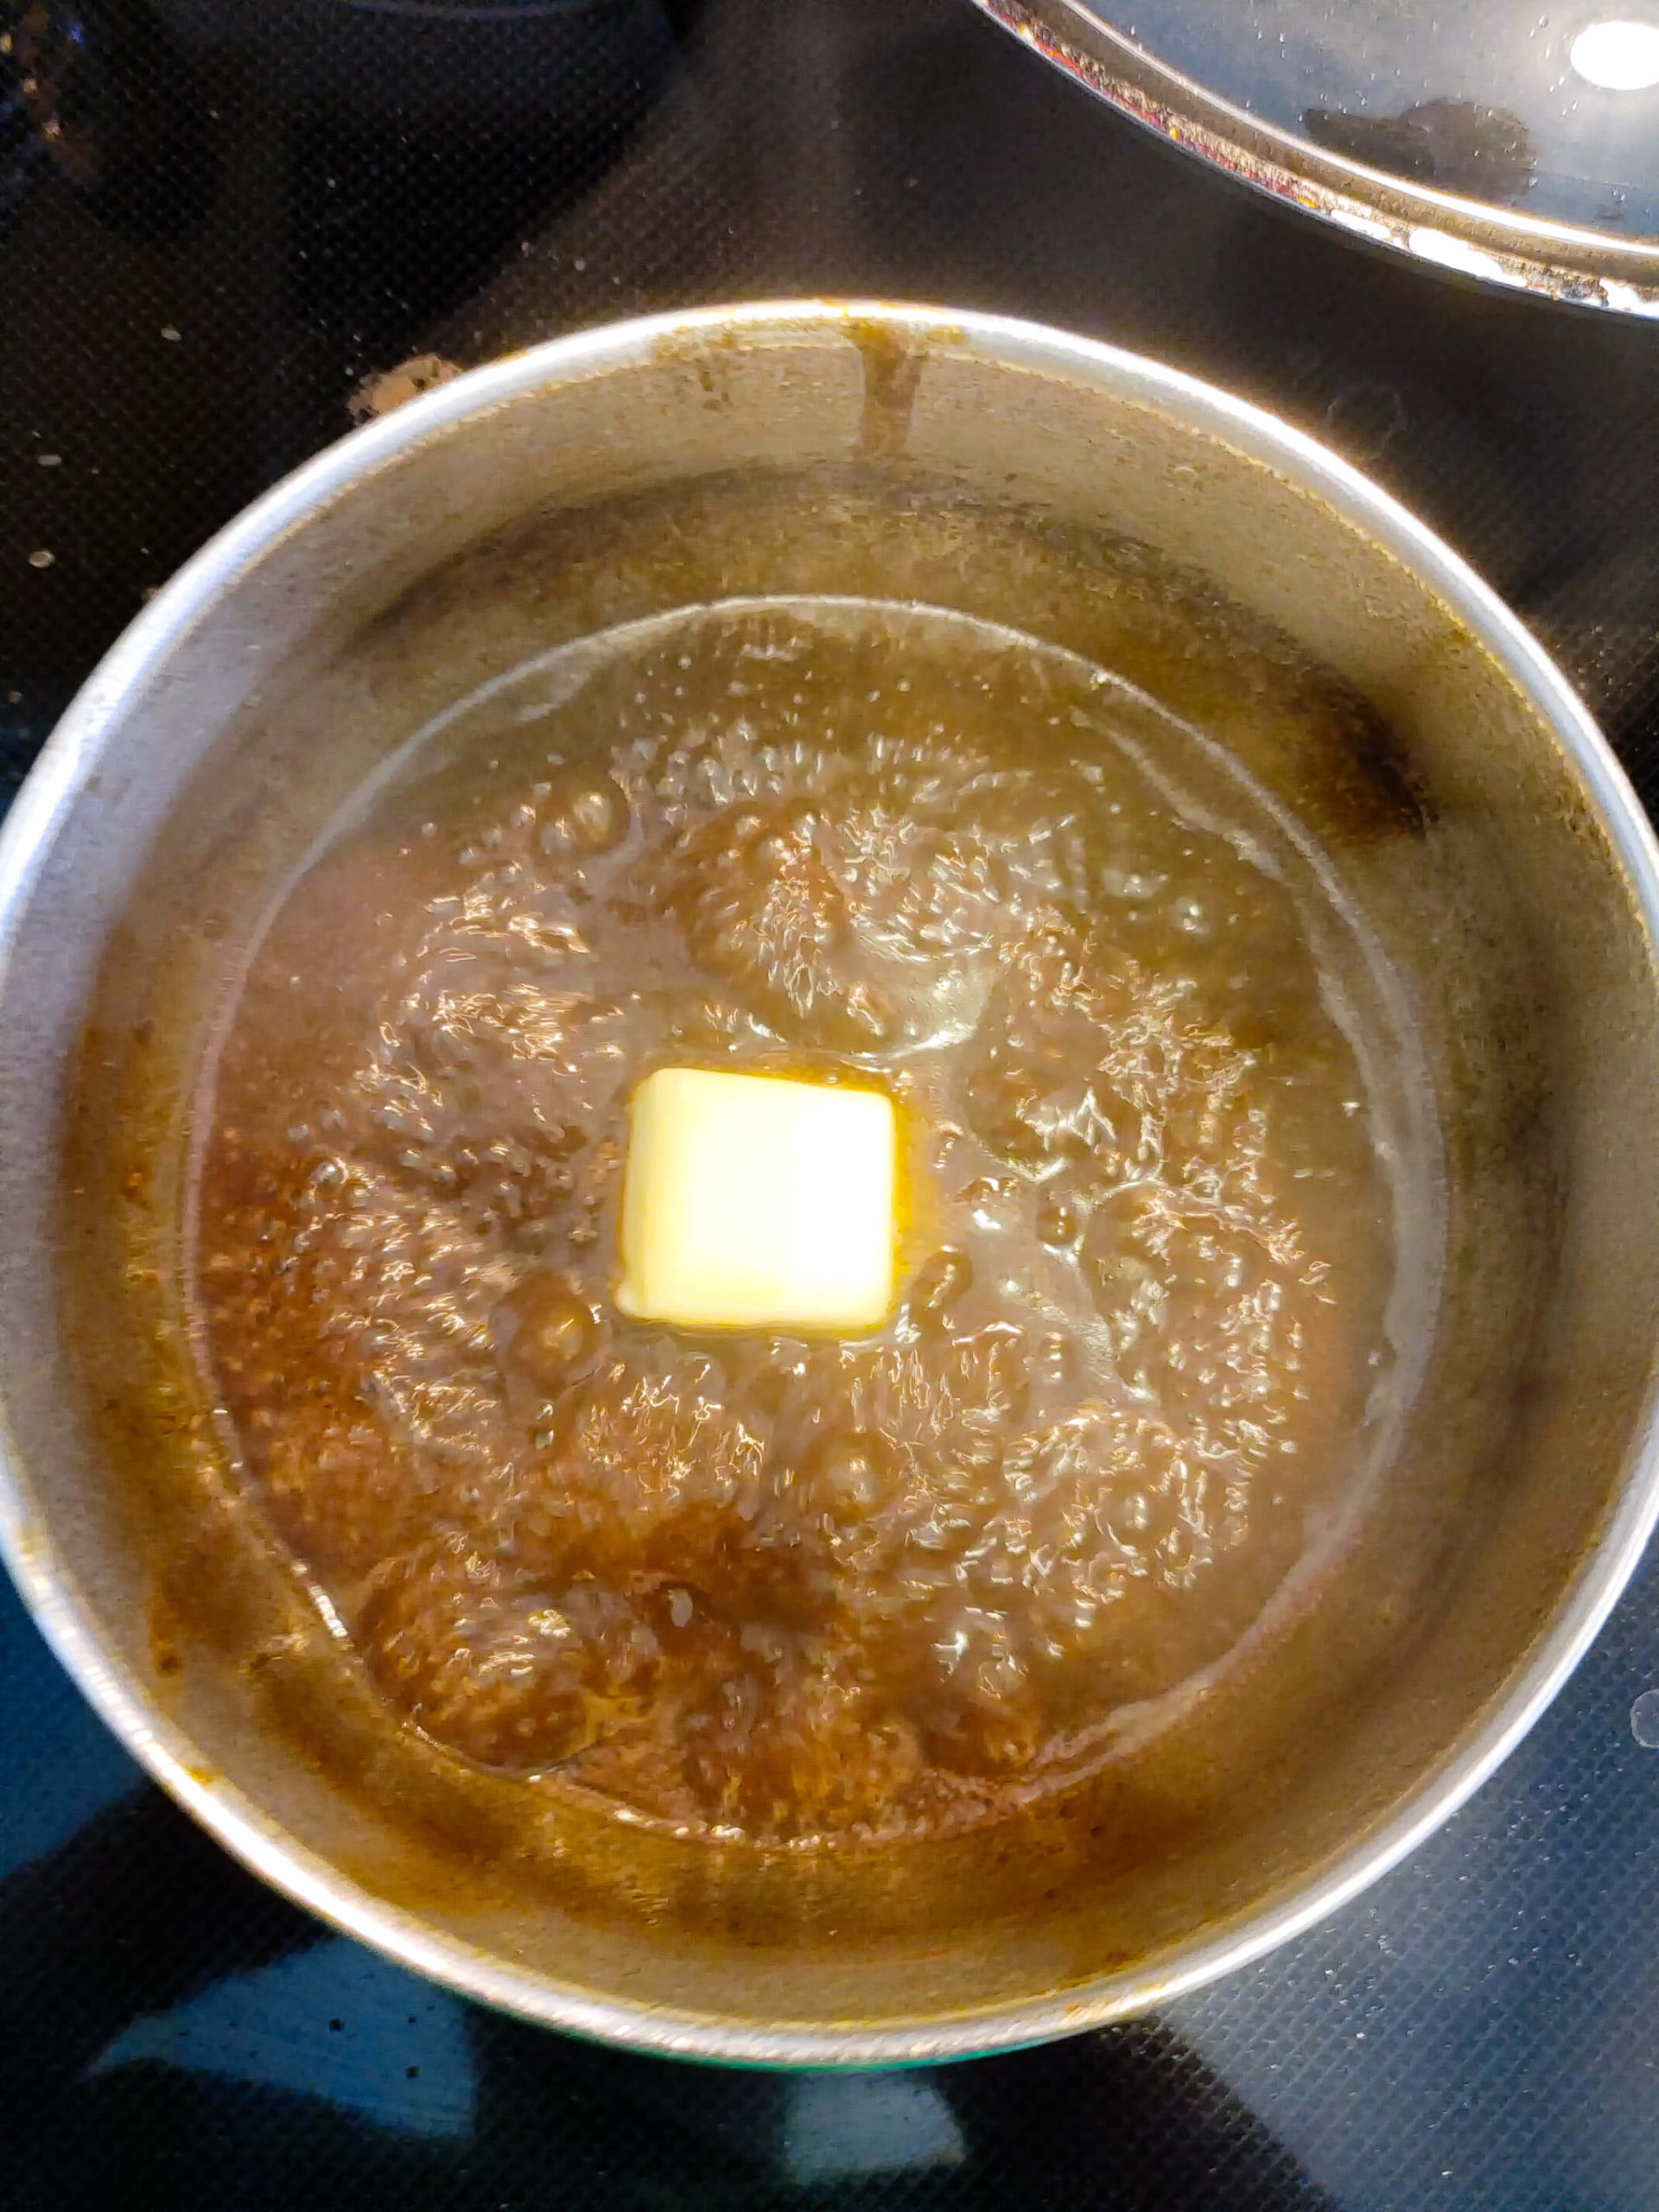 REDUCE THE MARINATE AND FINISH WITH BUTTER